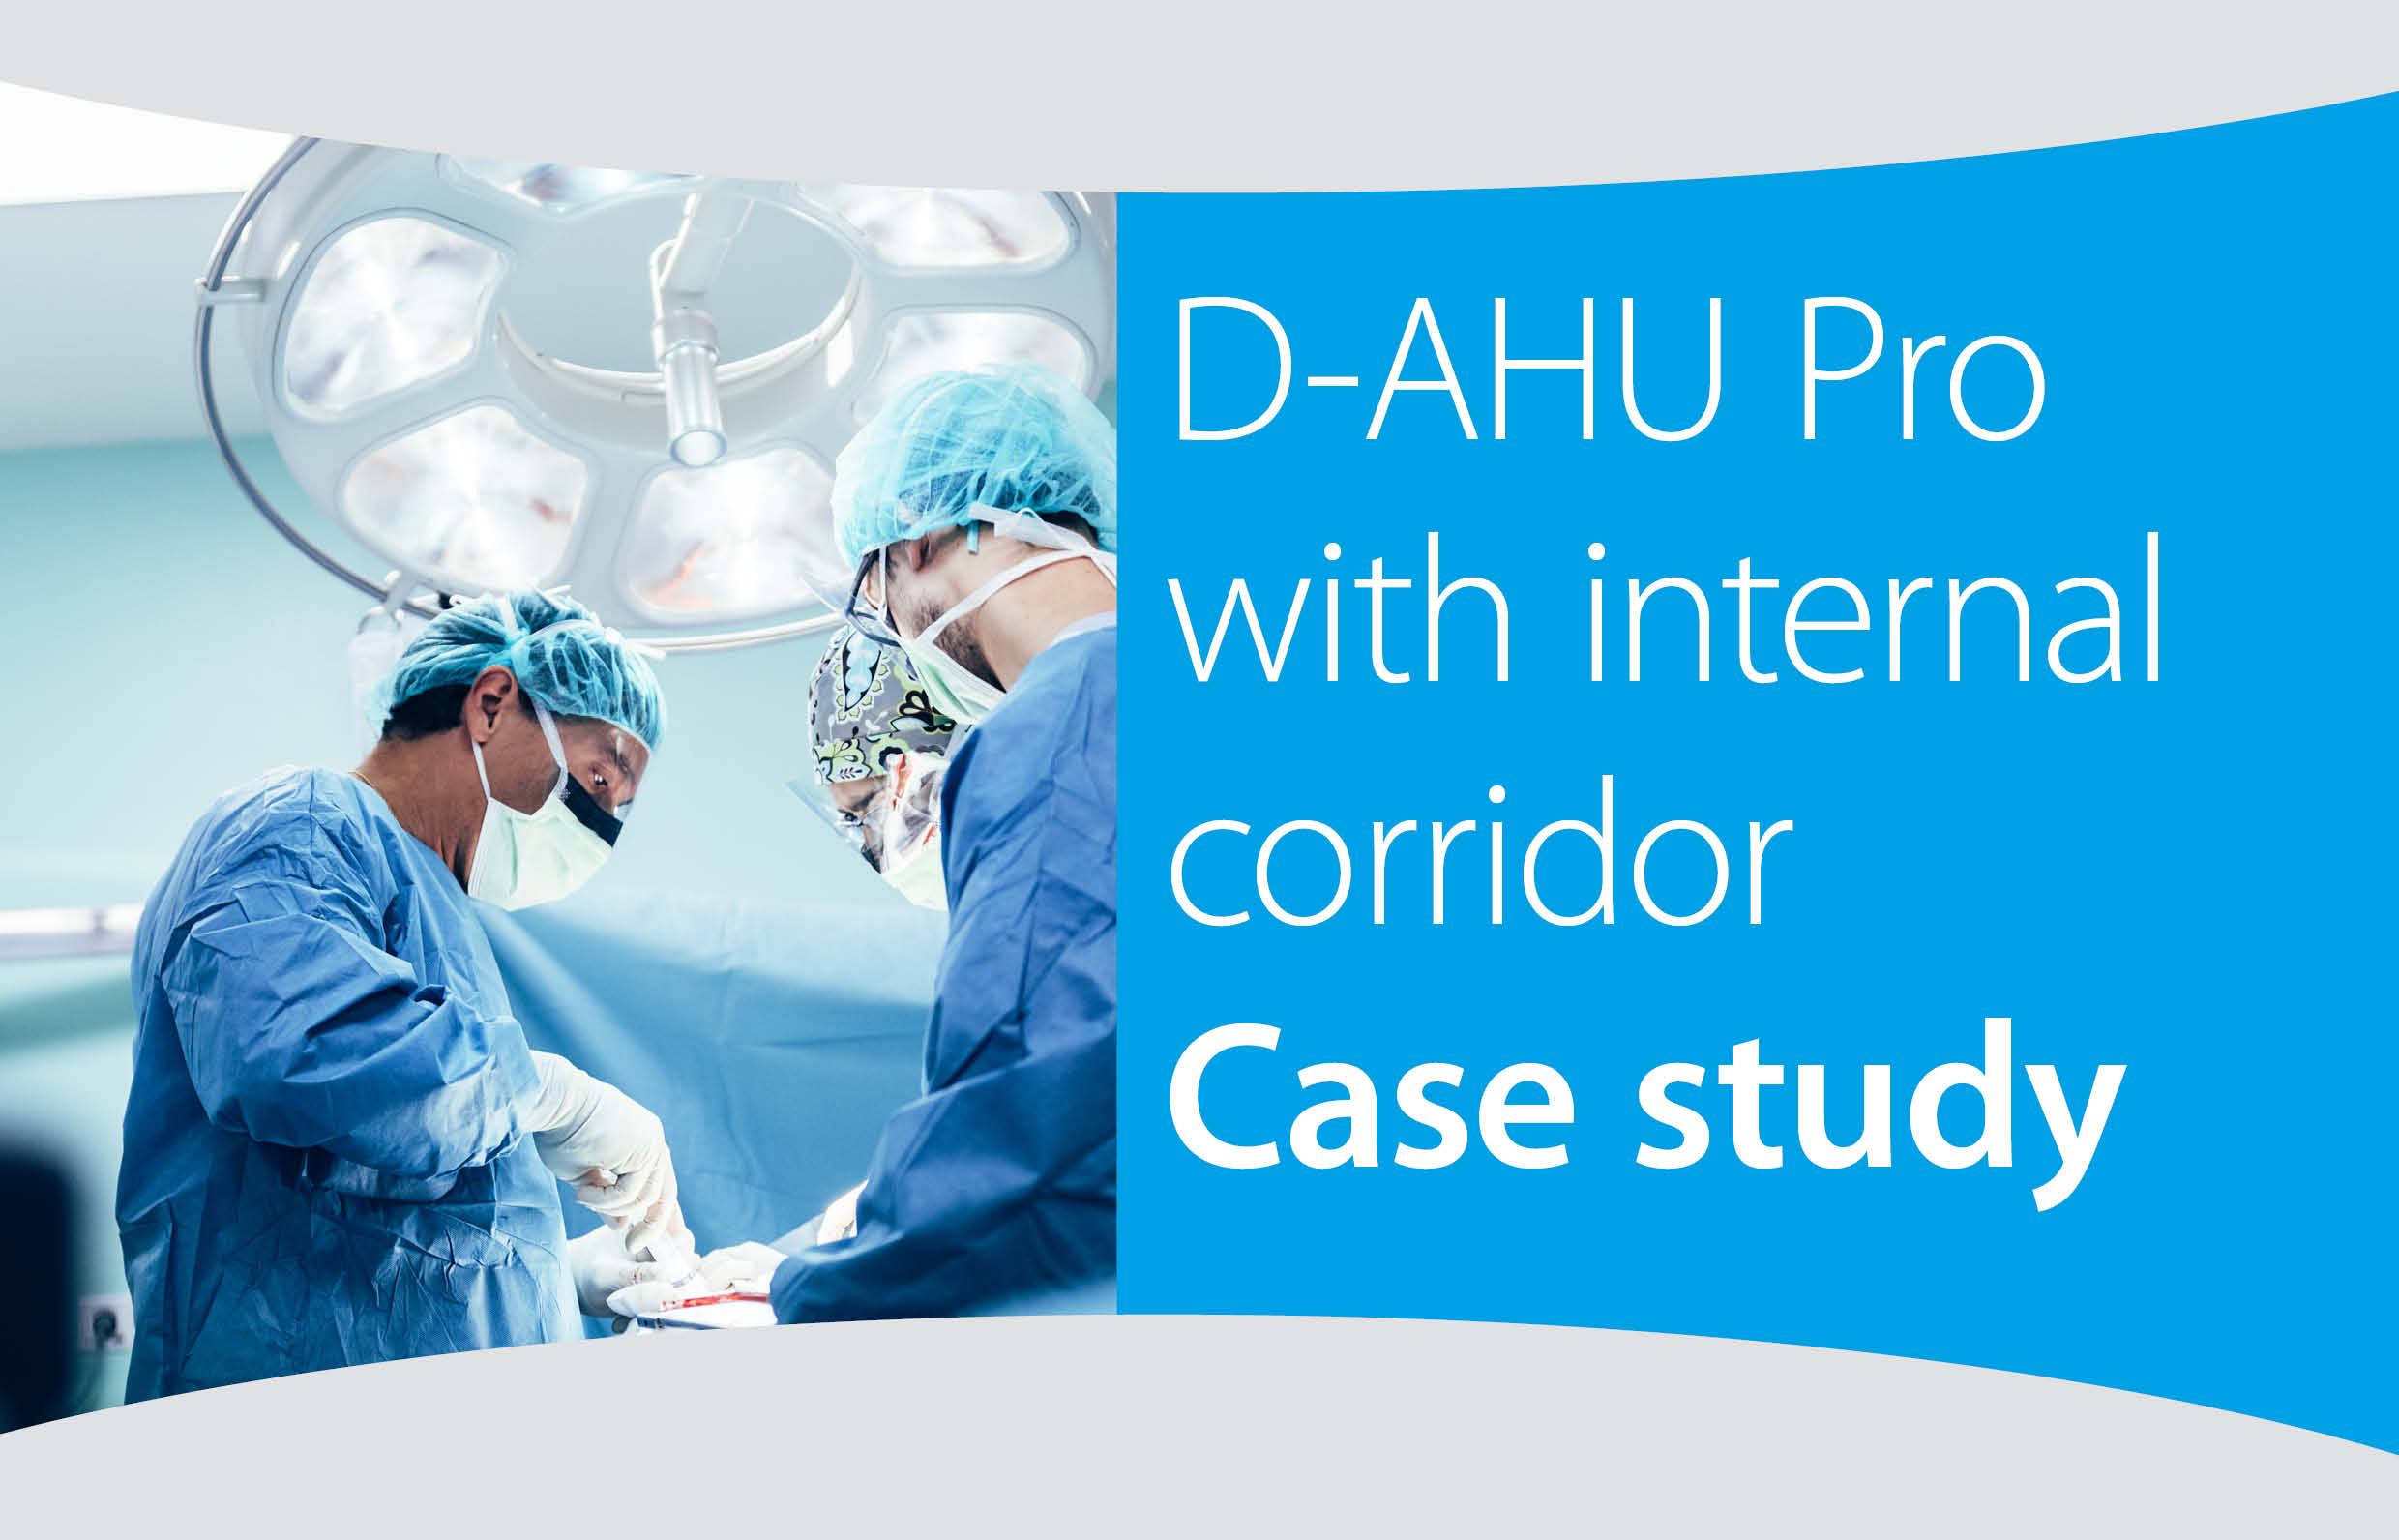 Case study – D-AHU Professional with integrated internal corridor